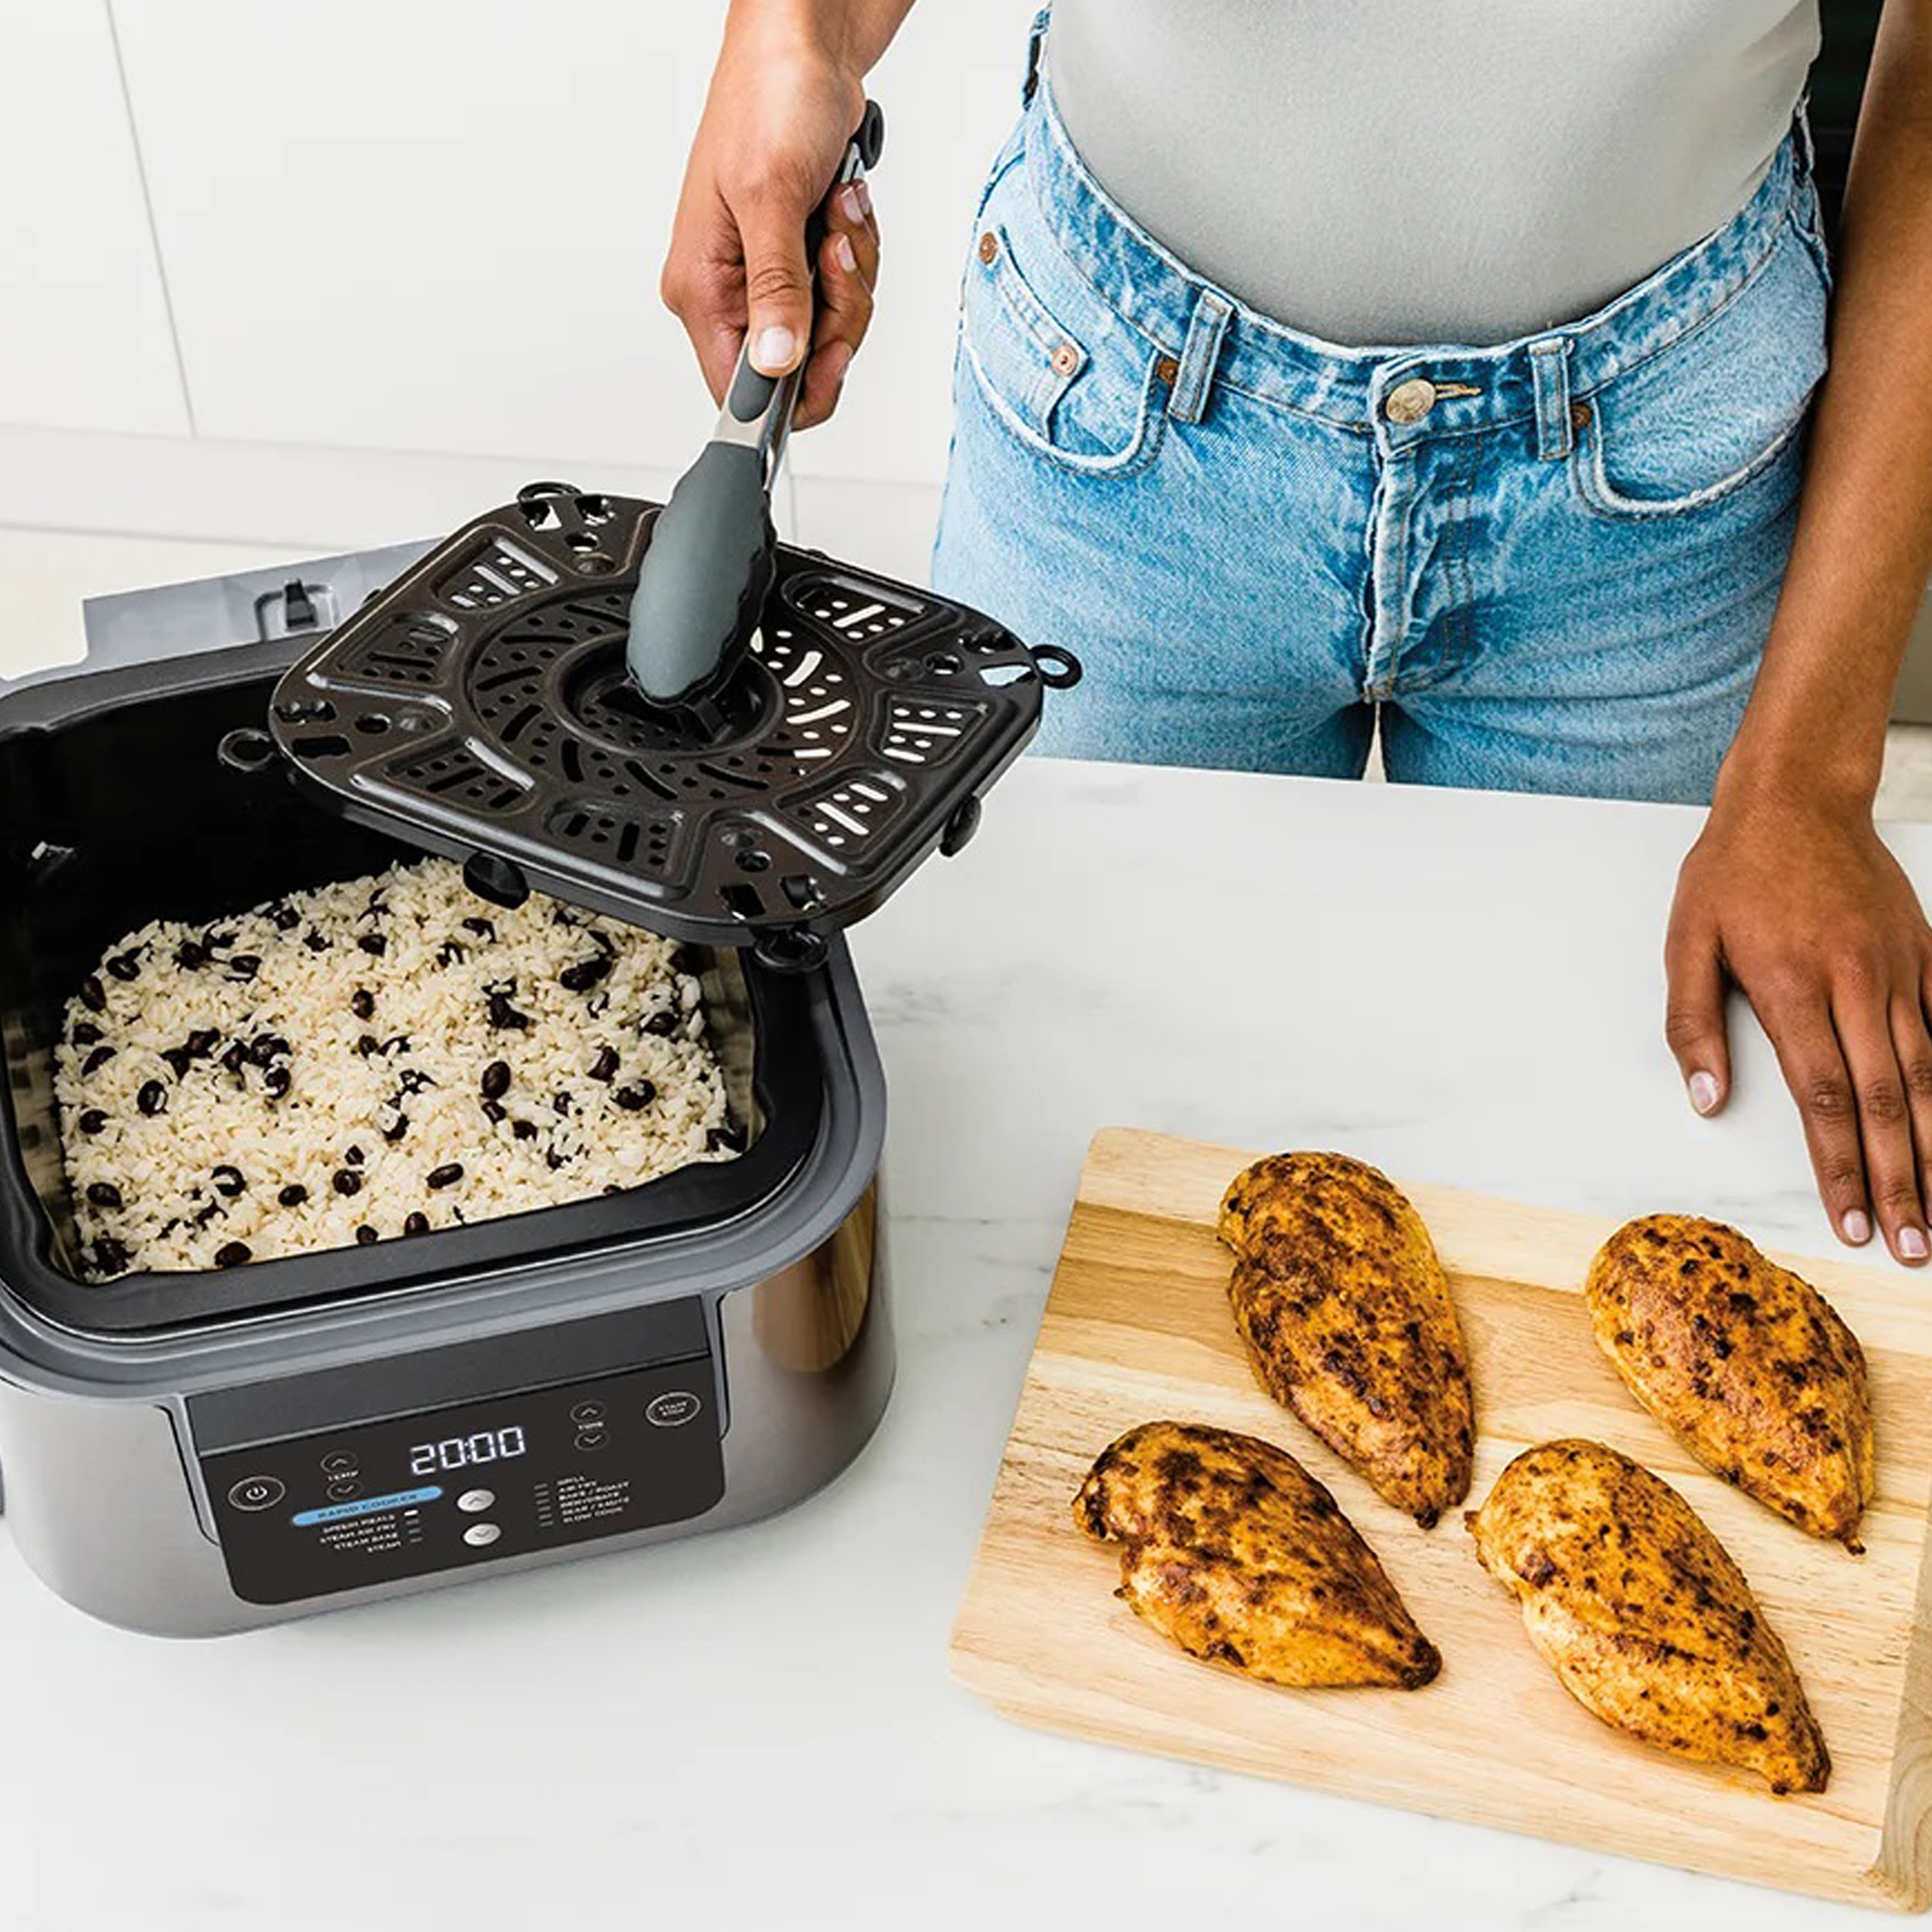 Cook with me and the Ninja Speedi @NinjaKitchen! Check out